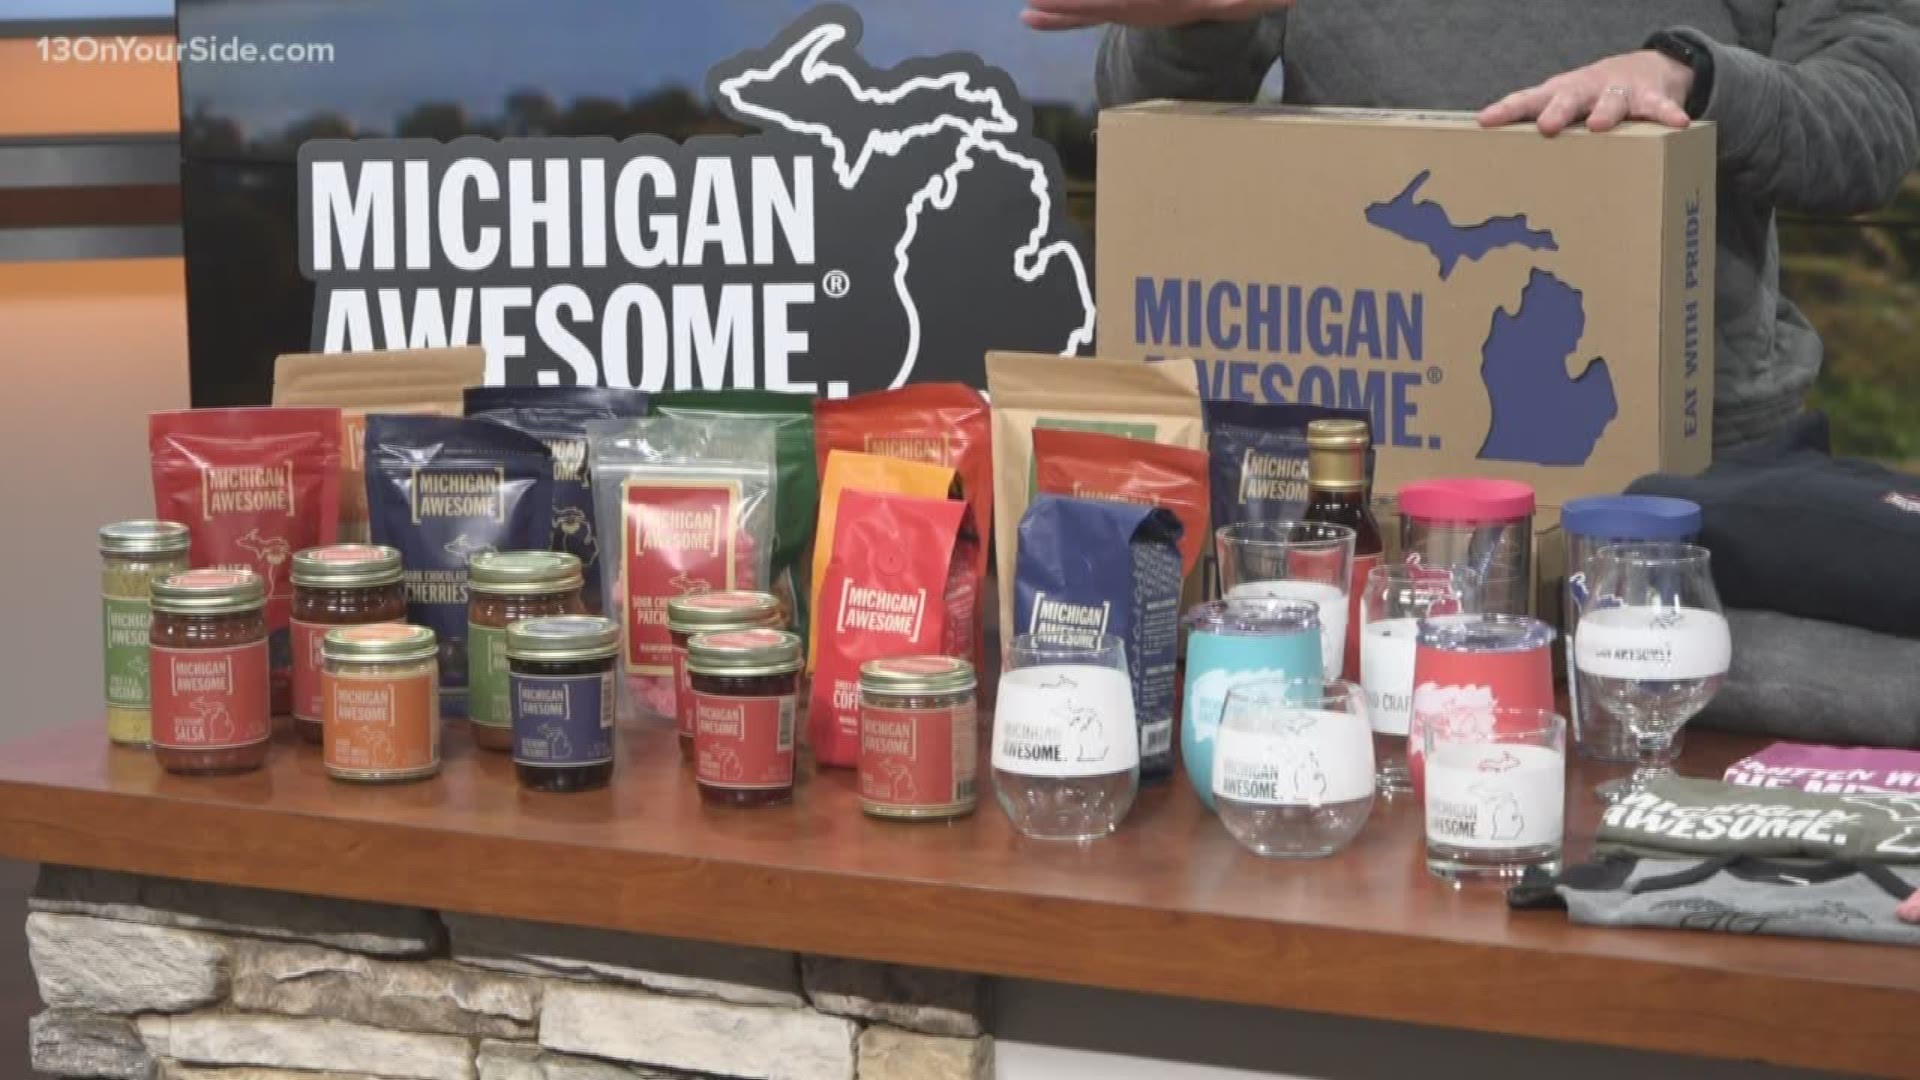 Get started on your holiday shopping with Michigan Awesome!